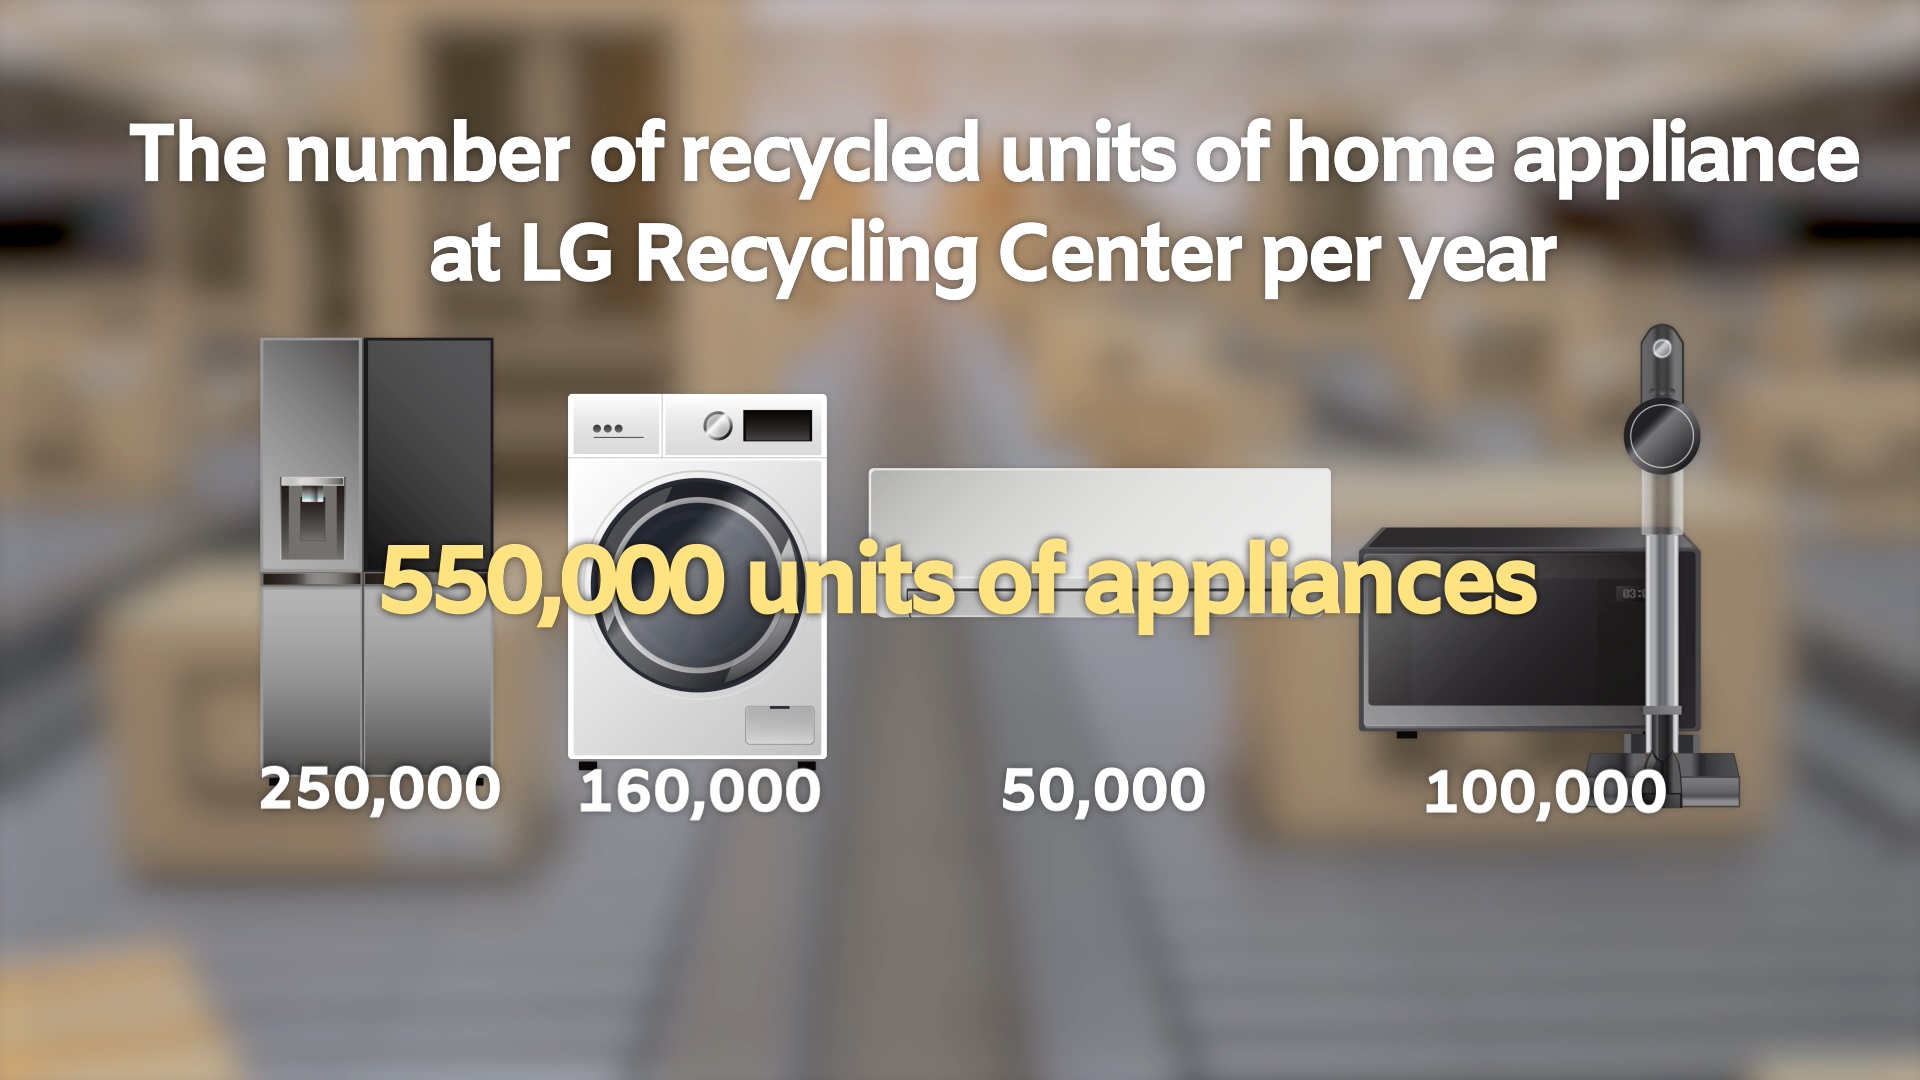 An infographic highlighting the fact that 550,000 appliances are recycled at LG Recycling Center every year.